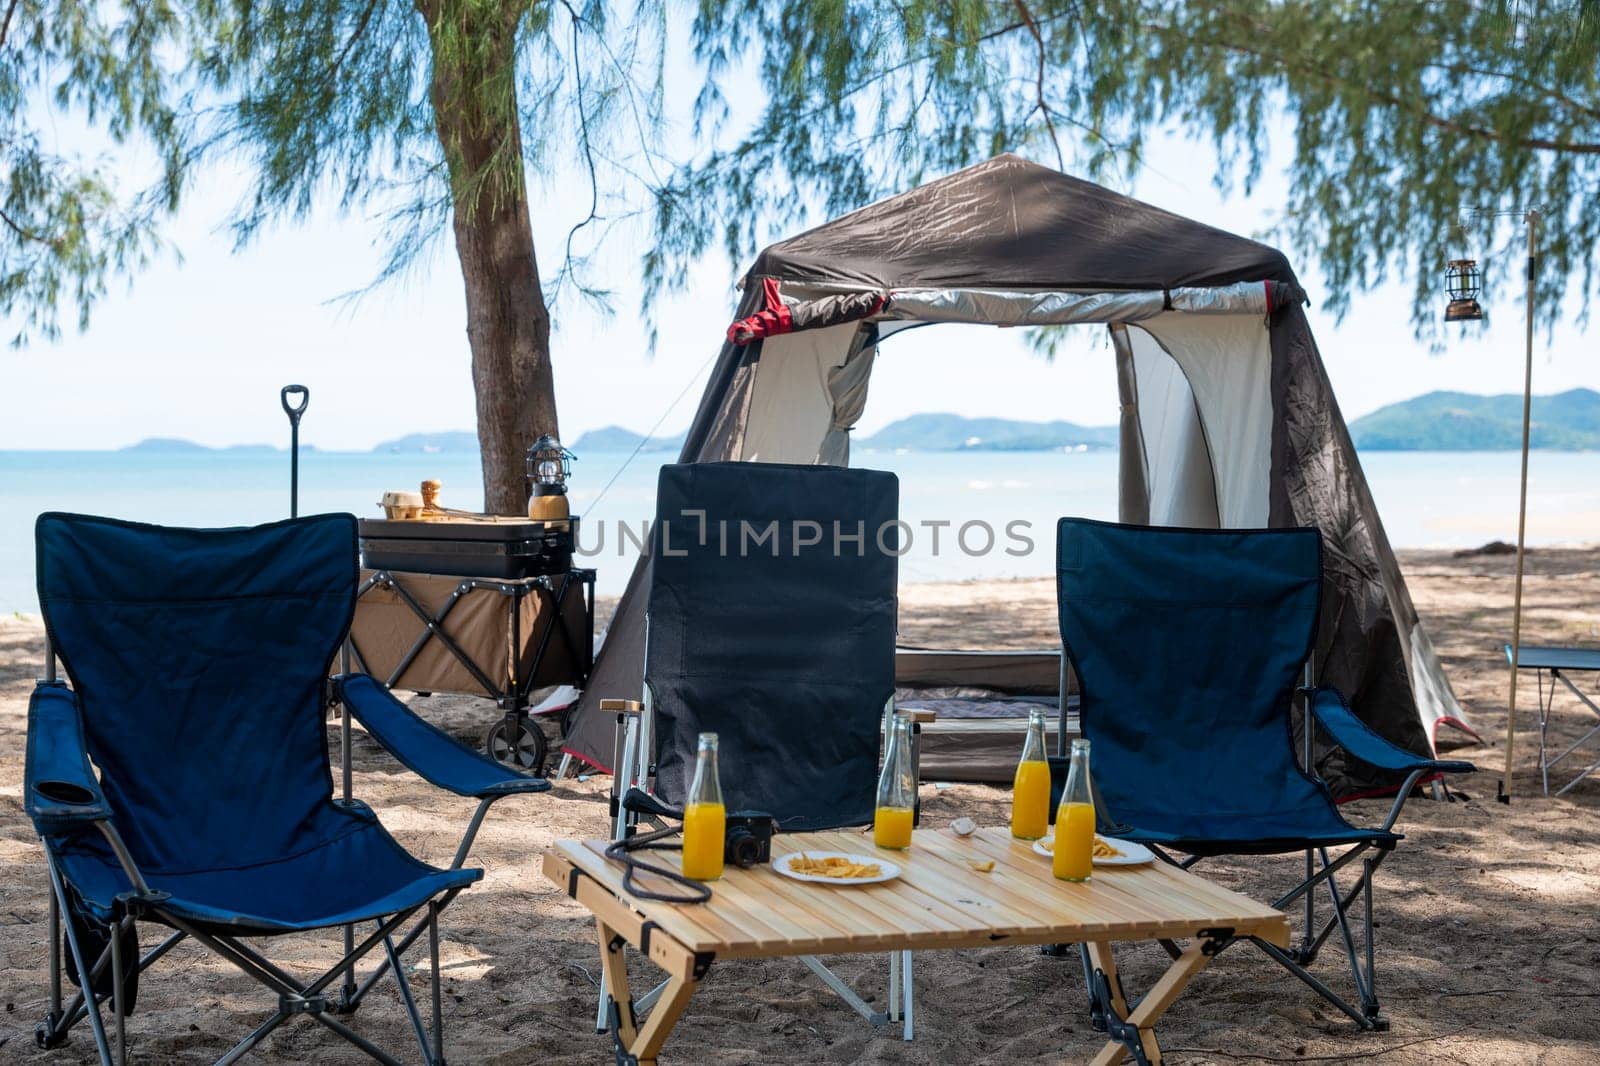 Unwind by the sea, Chairs, picnic table and tent create the perfect camping experience. Sunset, family, and the great outdoors this is where the journey to nature begins. The environment is calling. by Sorapop